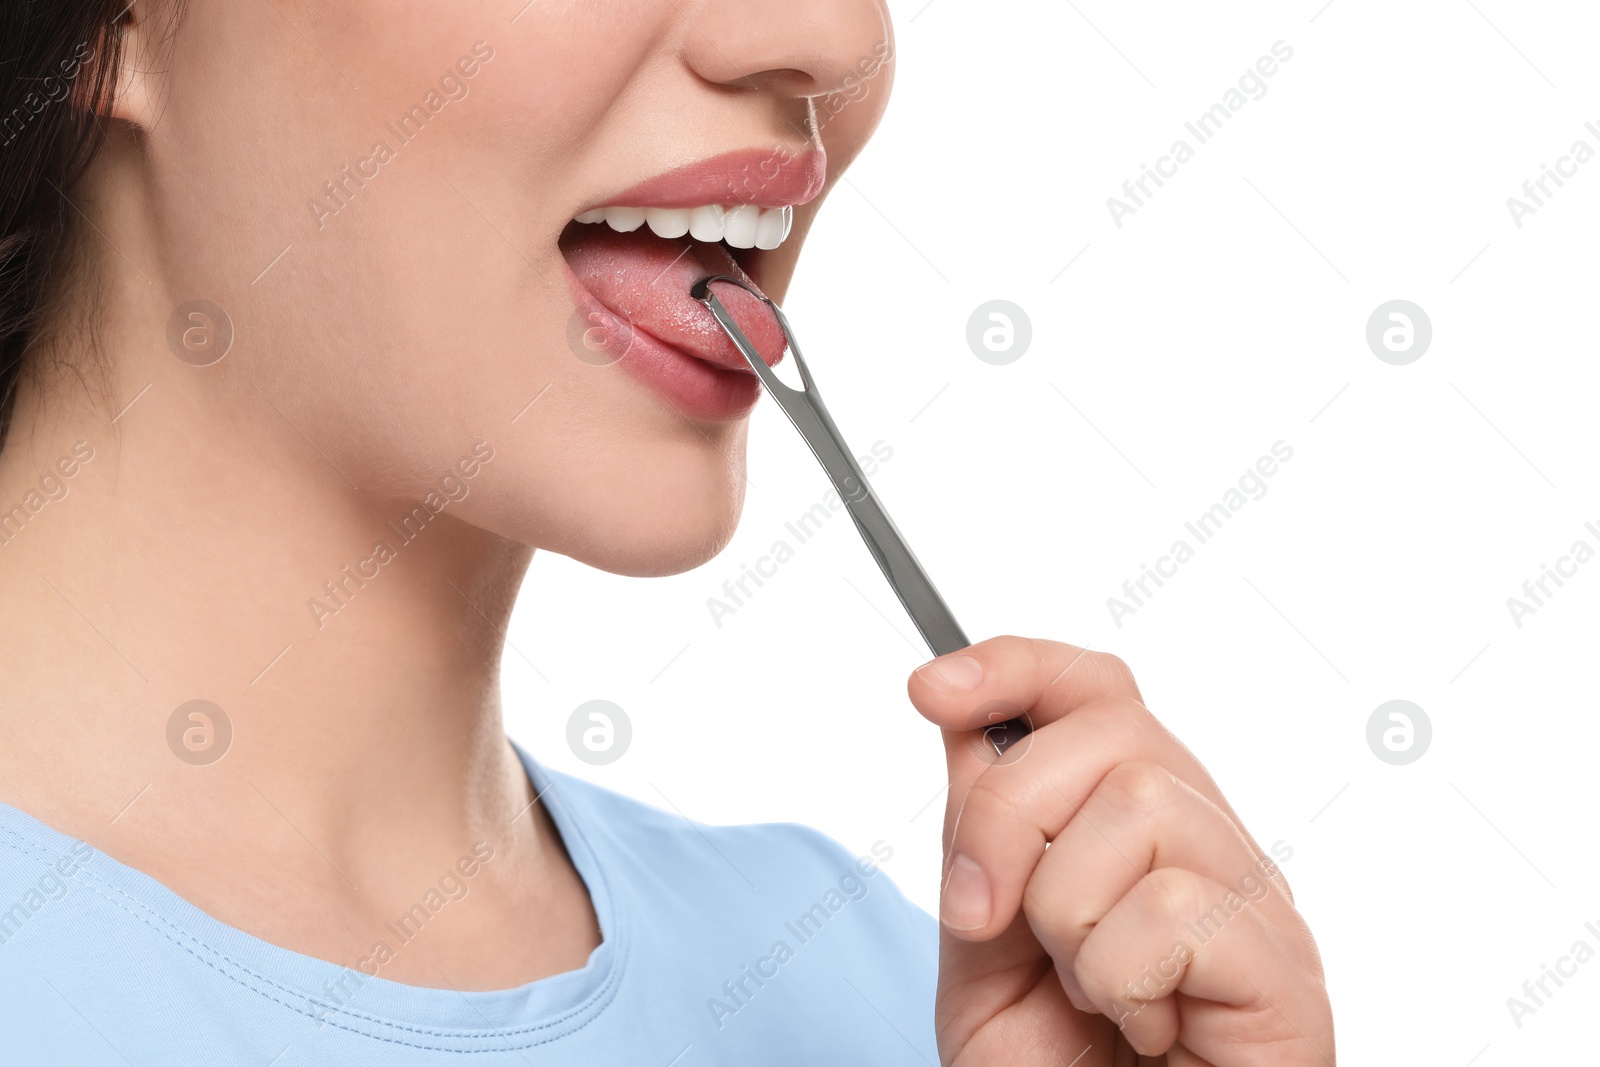 Photo of Woman brushing her tongue with cleaner on white background, closeup